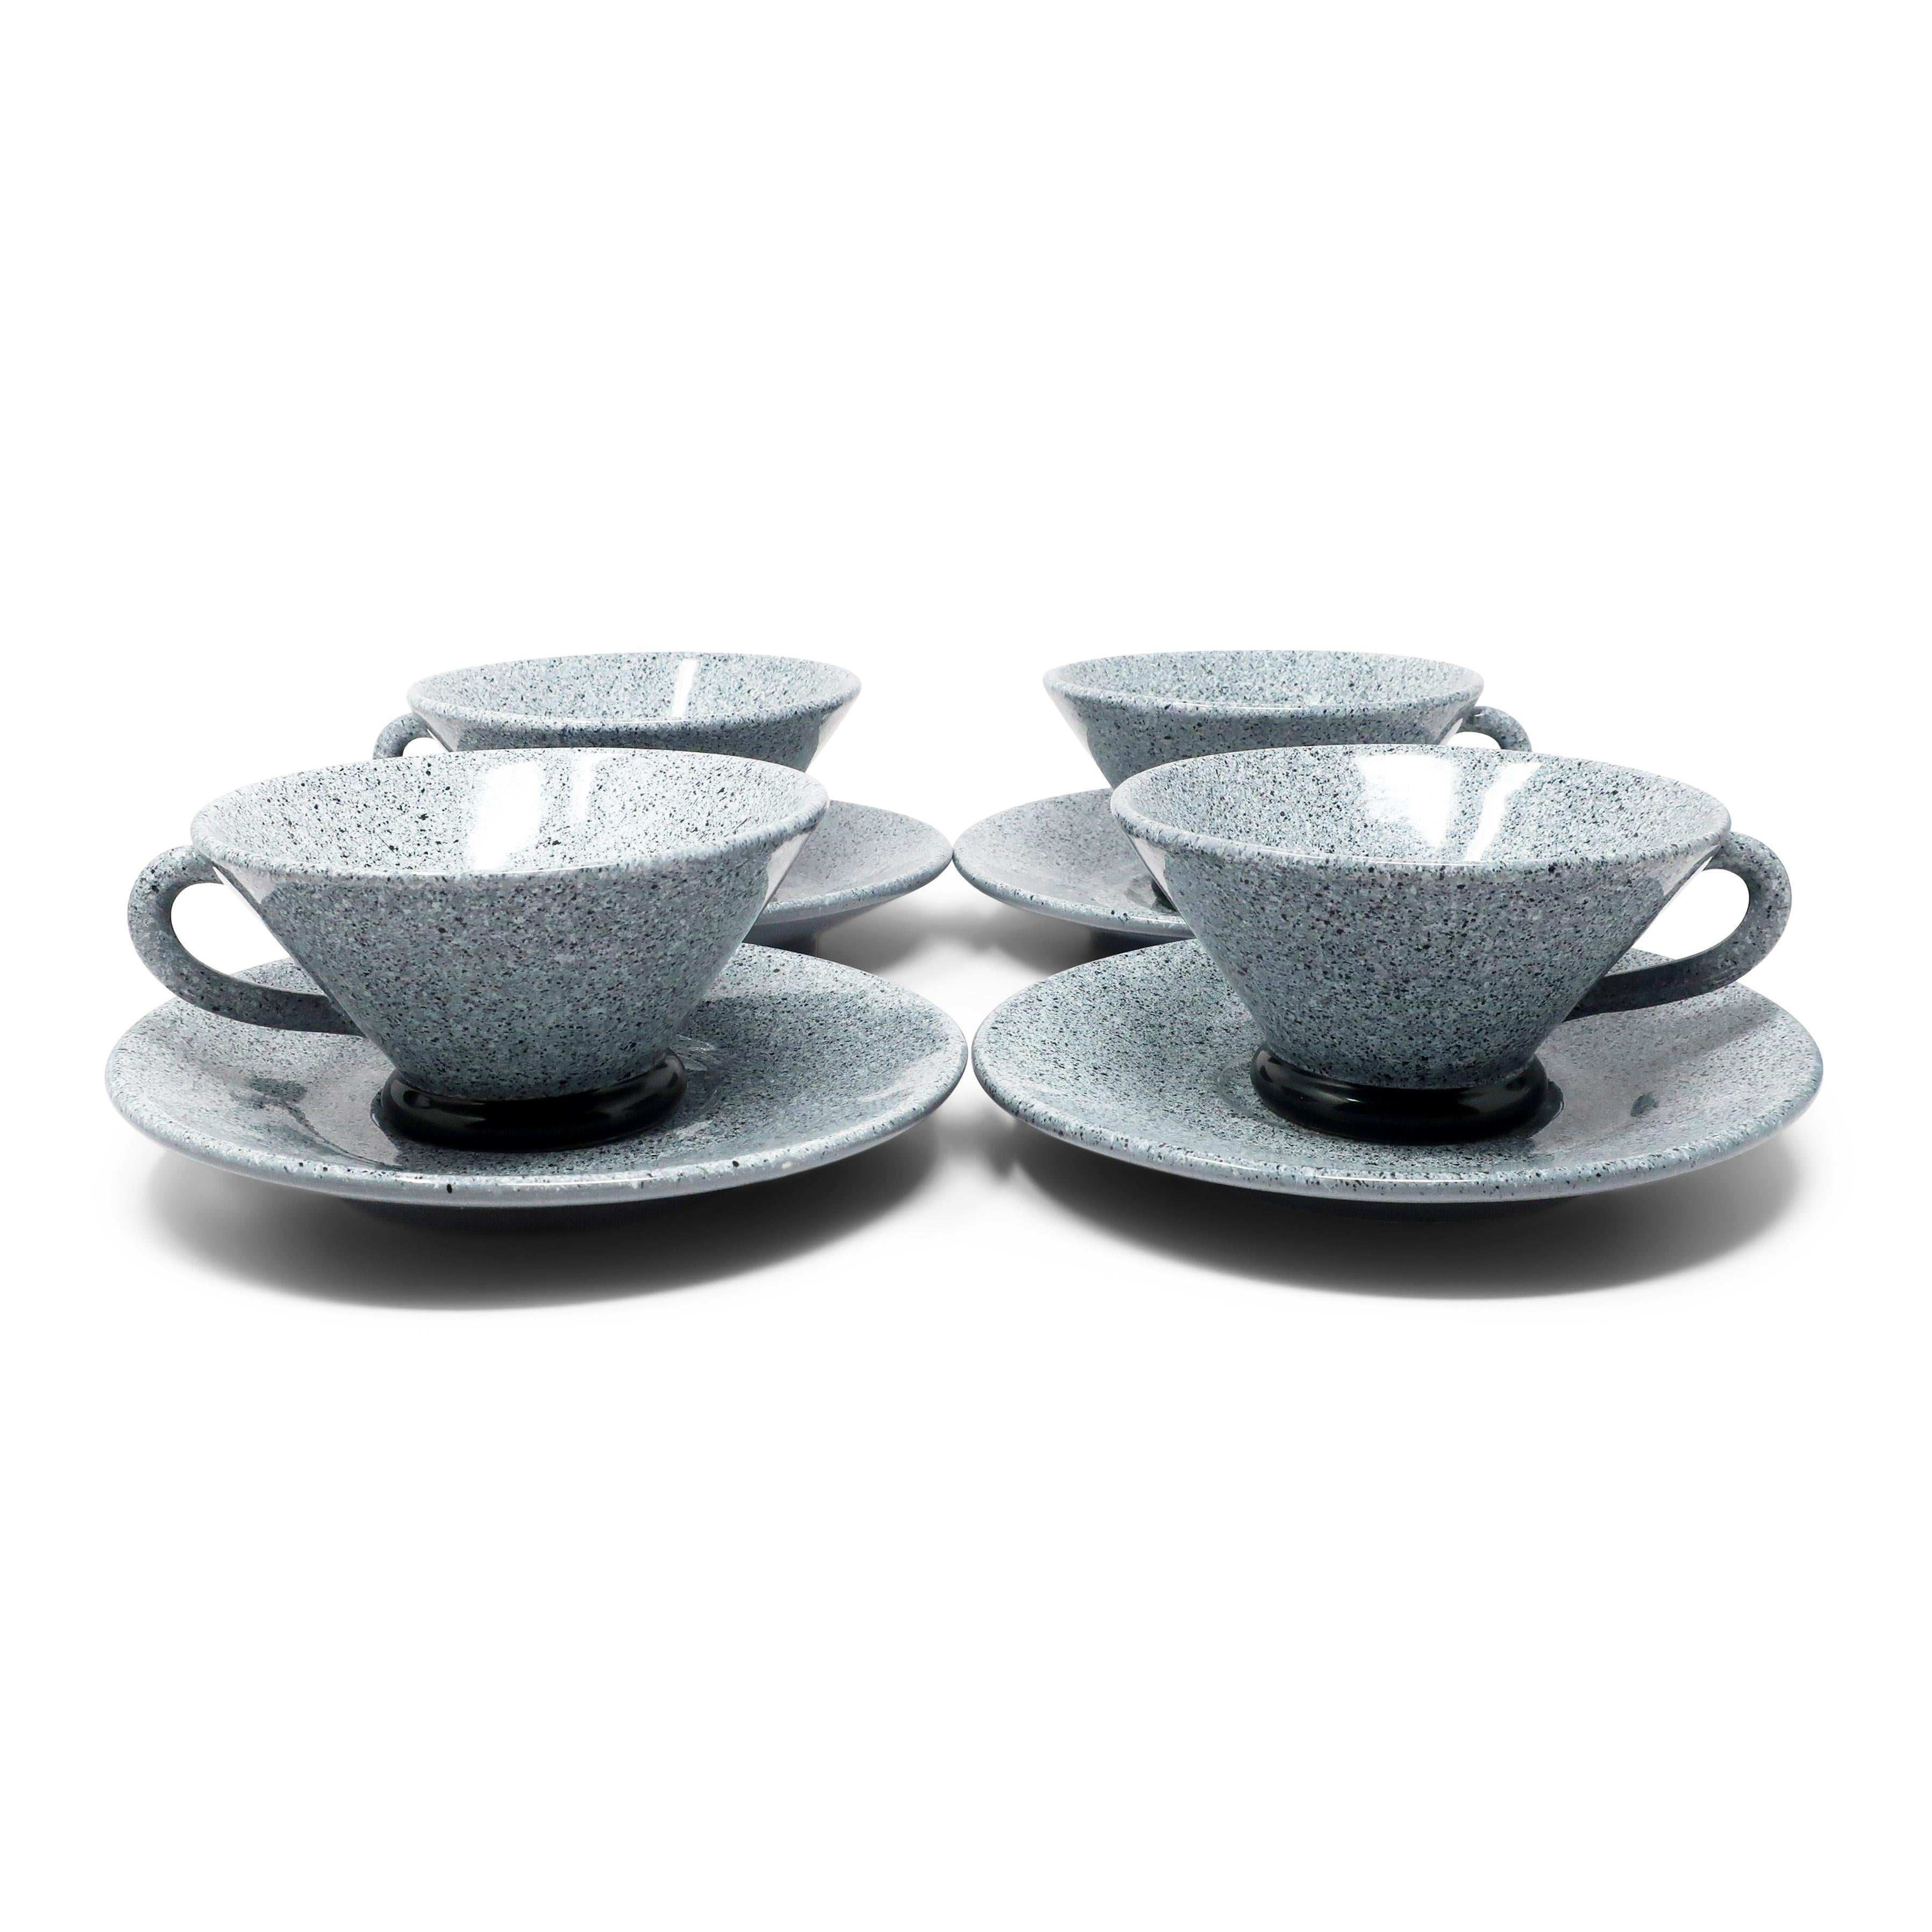 Post-Modern 1980s Postmodern Cups, Saucers and Pitcher Set by Baldelli For Sale